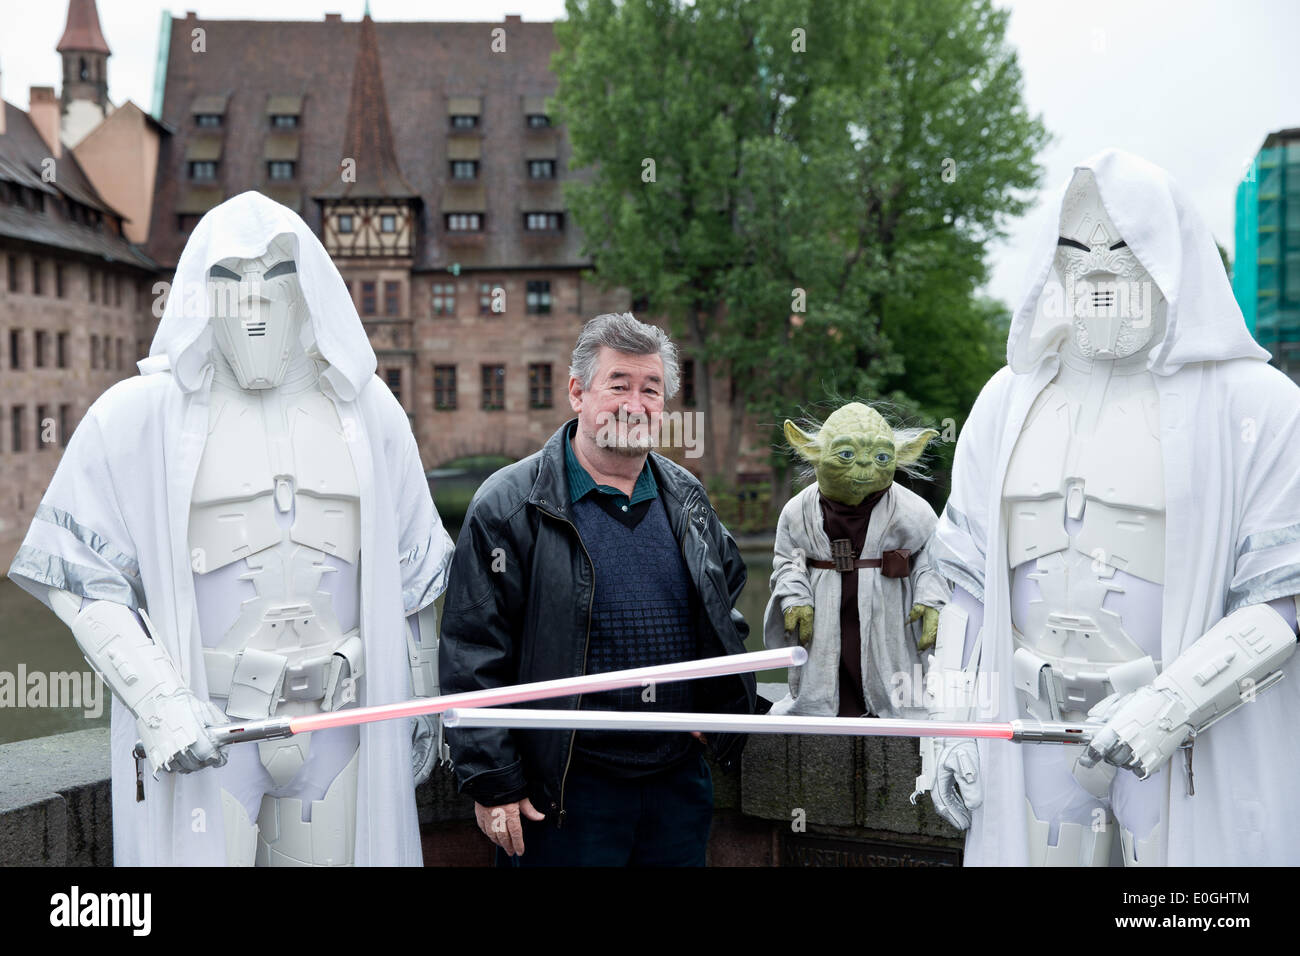 Nuremberg, Germany. 07th May, 2014. Make-up artist Nick Maley, one of the designers of Yoda from the science fiction film Star Wars stands with a Yoga figure and two other figures at the old town in Nuremberg, Germany, 07 May 2014. 64 year-old is planning a new museum for special effects, fantasy and science fiction films in Nuremberg. Photo: DANIEL KARMANN/dpa/Alamy Live News Stock Photo